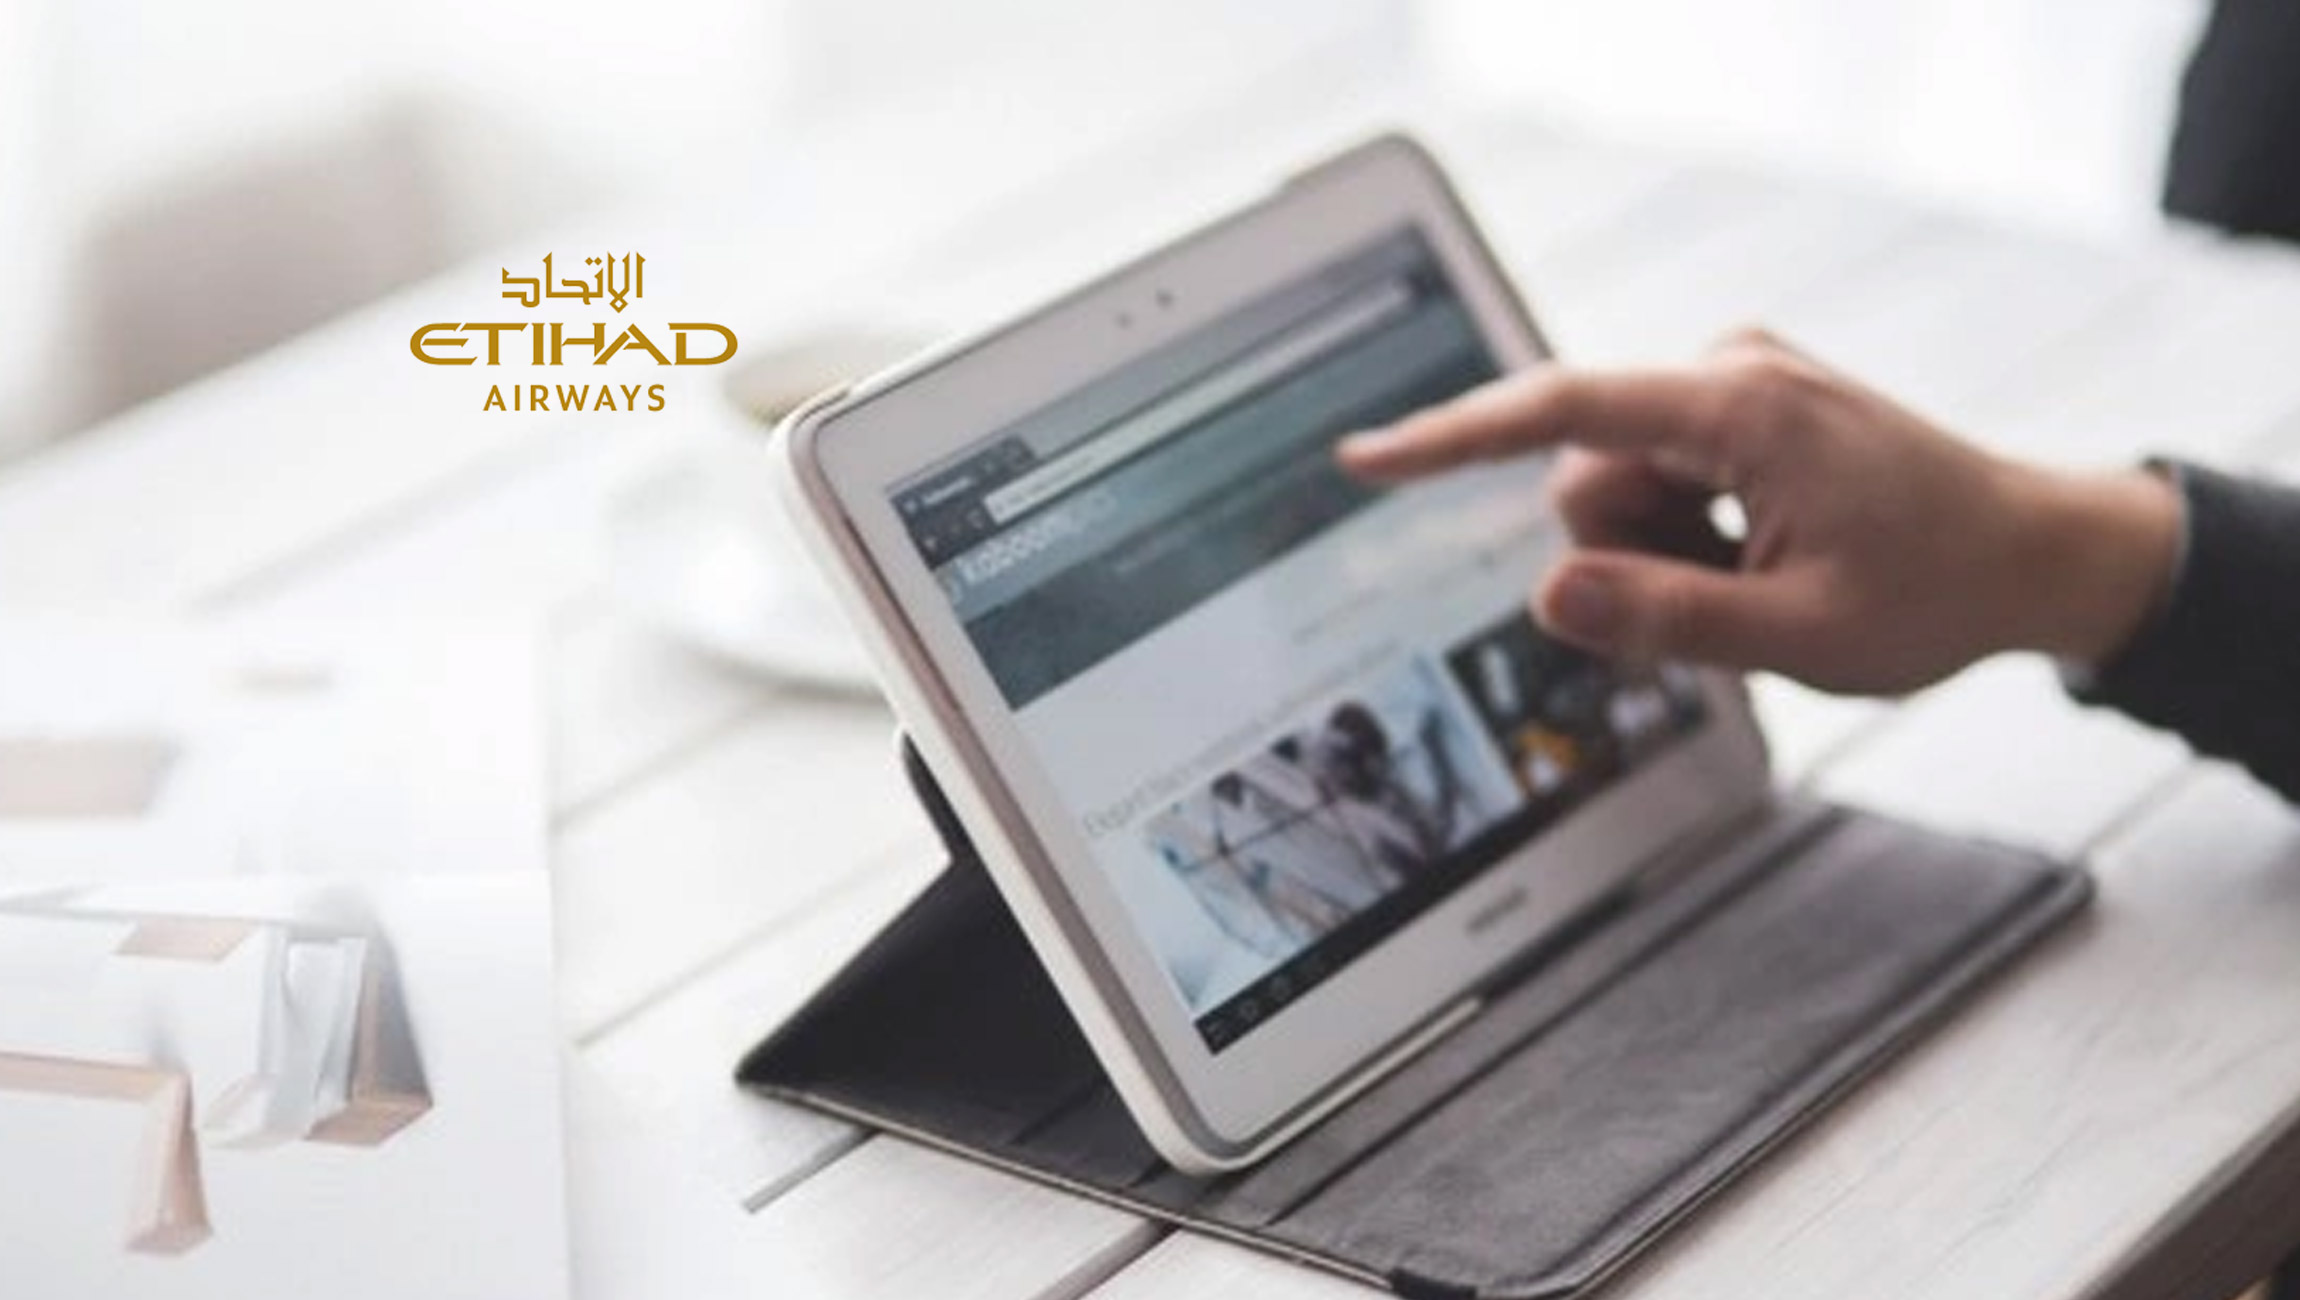 Etihad Airways Goes Live with Spitch.ai's Virtual Assistant to Assist Passengers with Covid-Related Travel Information